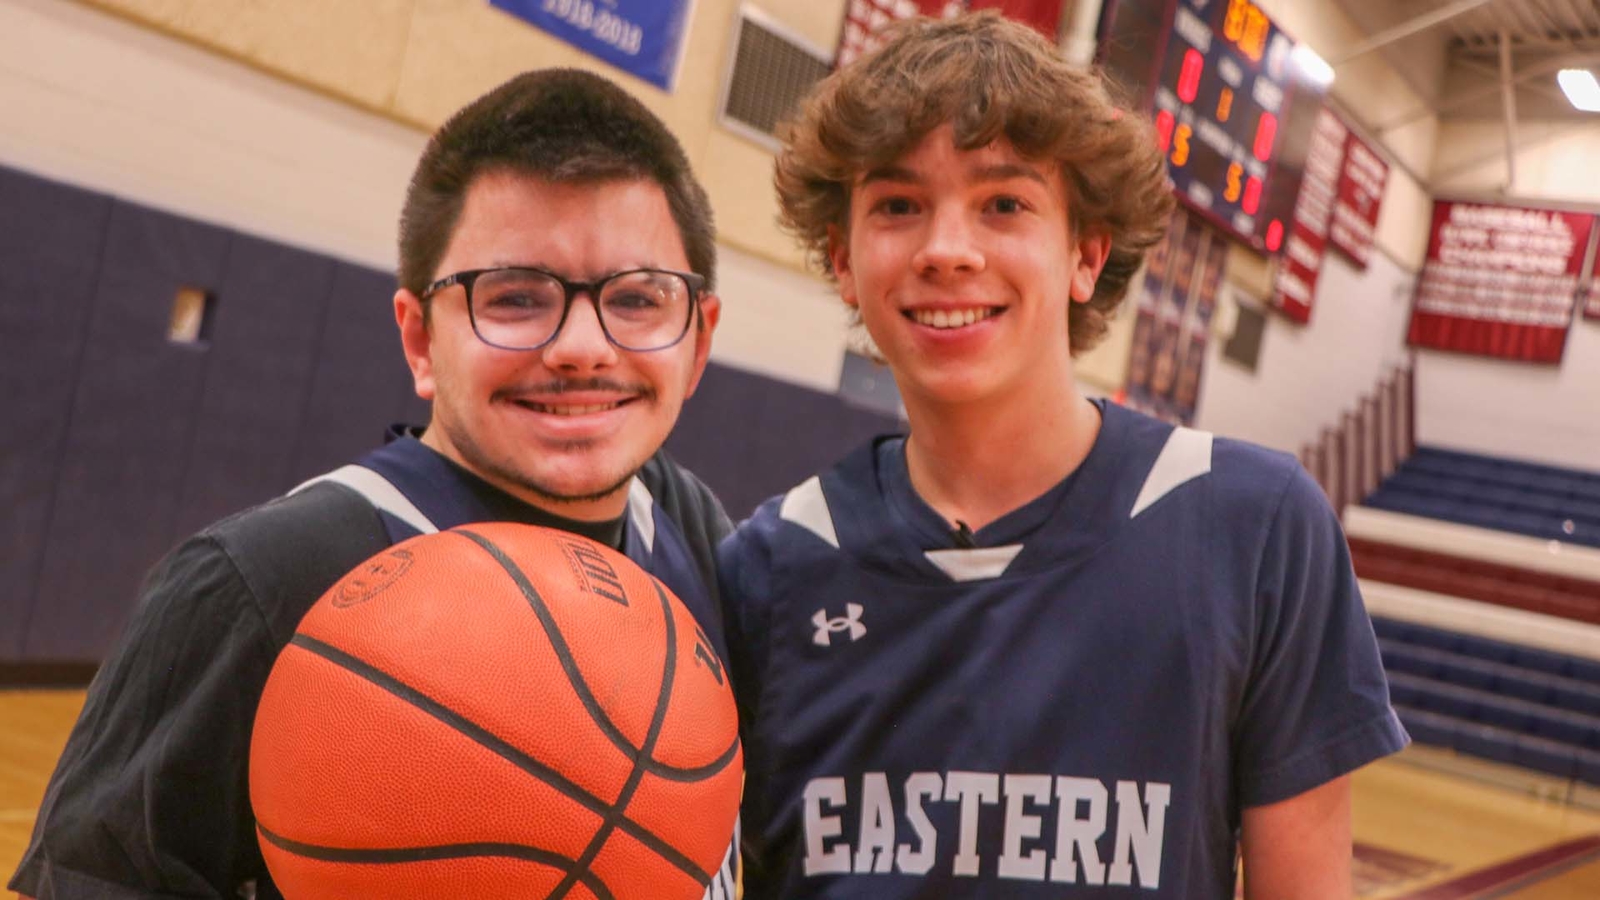 ‘Unified’ athletes score big on new basketball team at NJ high school [Video]